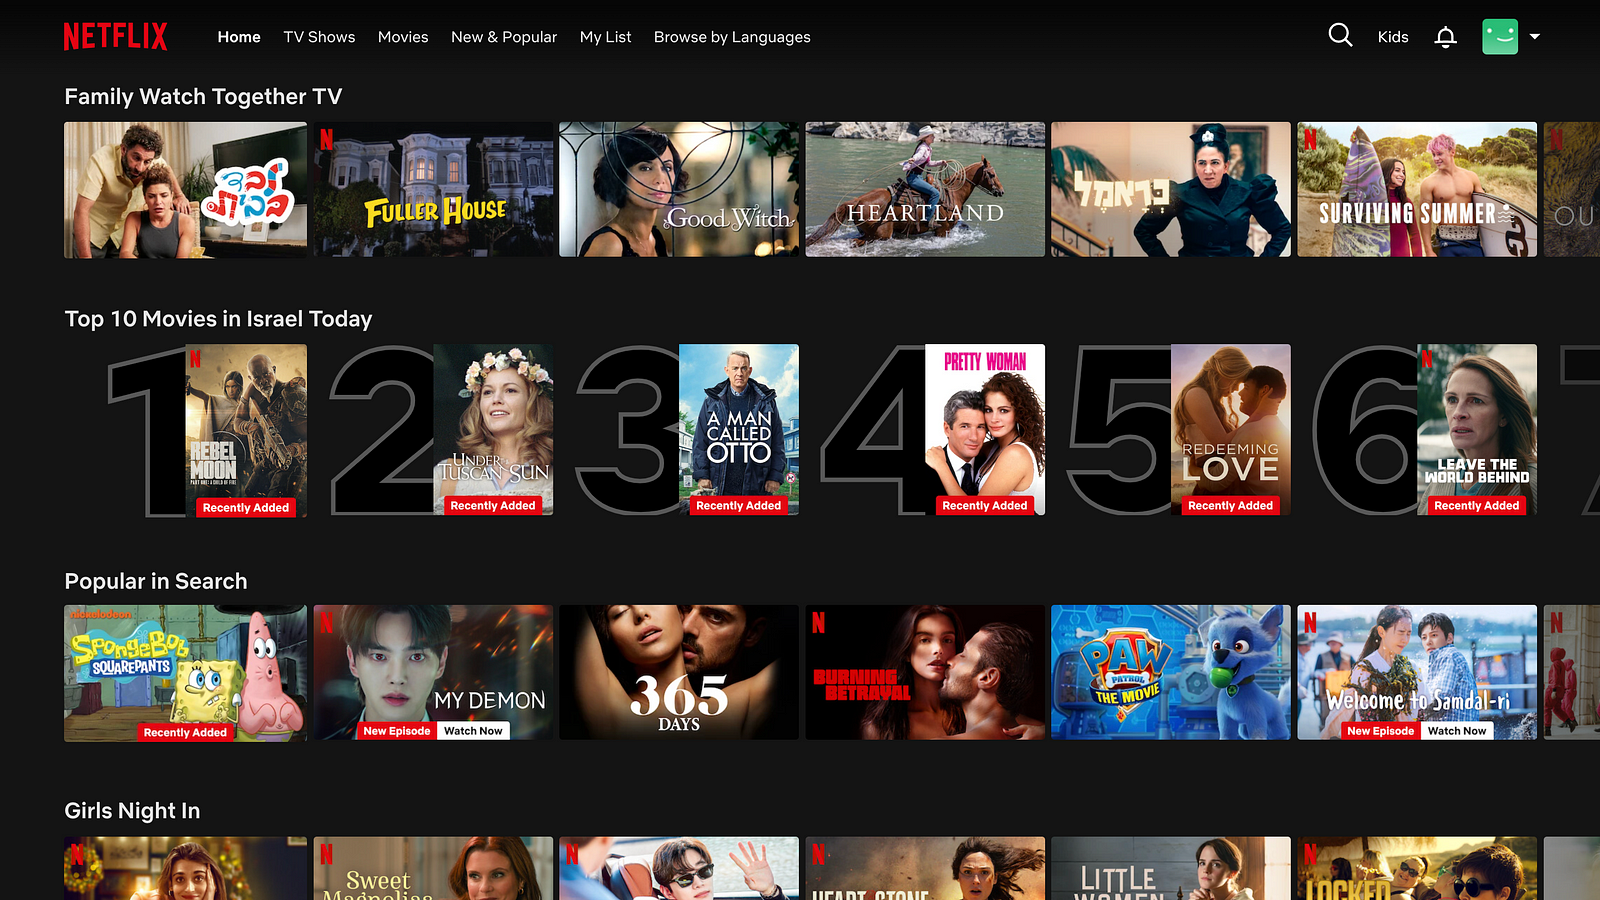 Netflix: Review of the First-Time User Experience